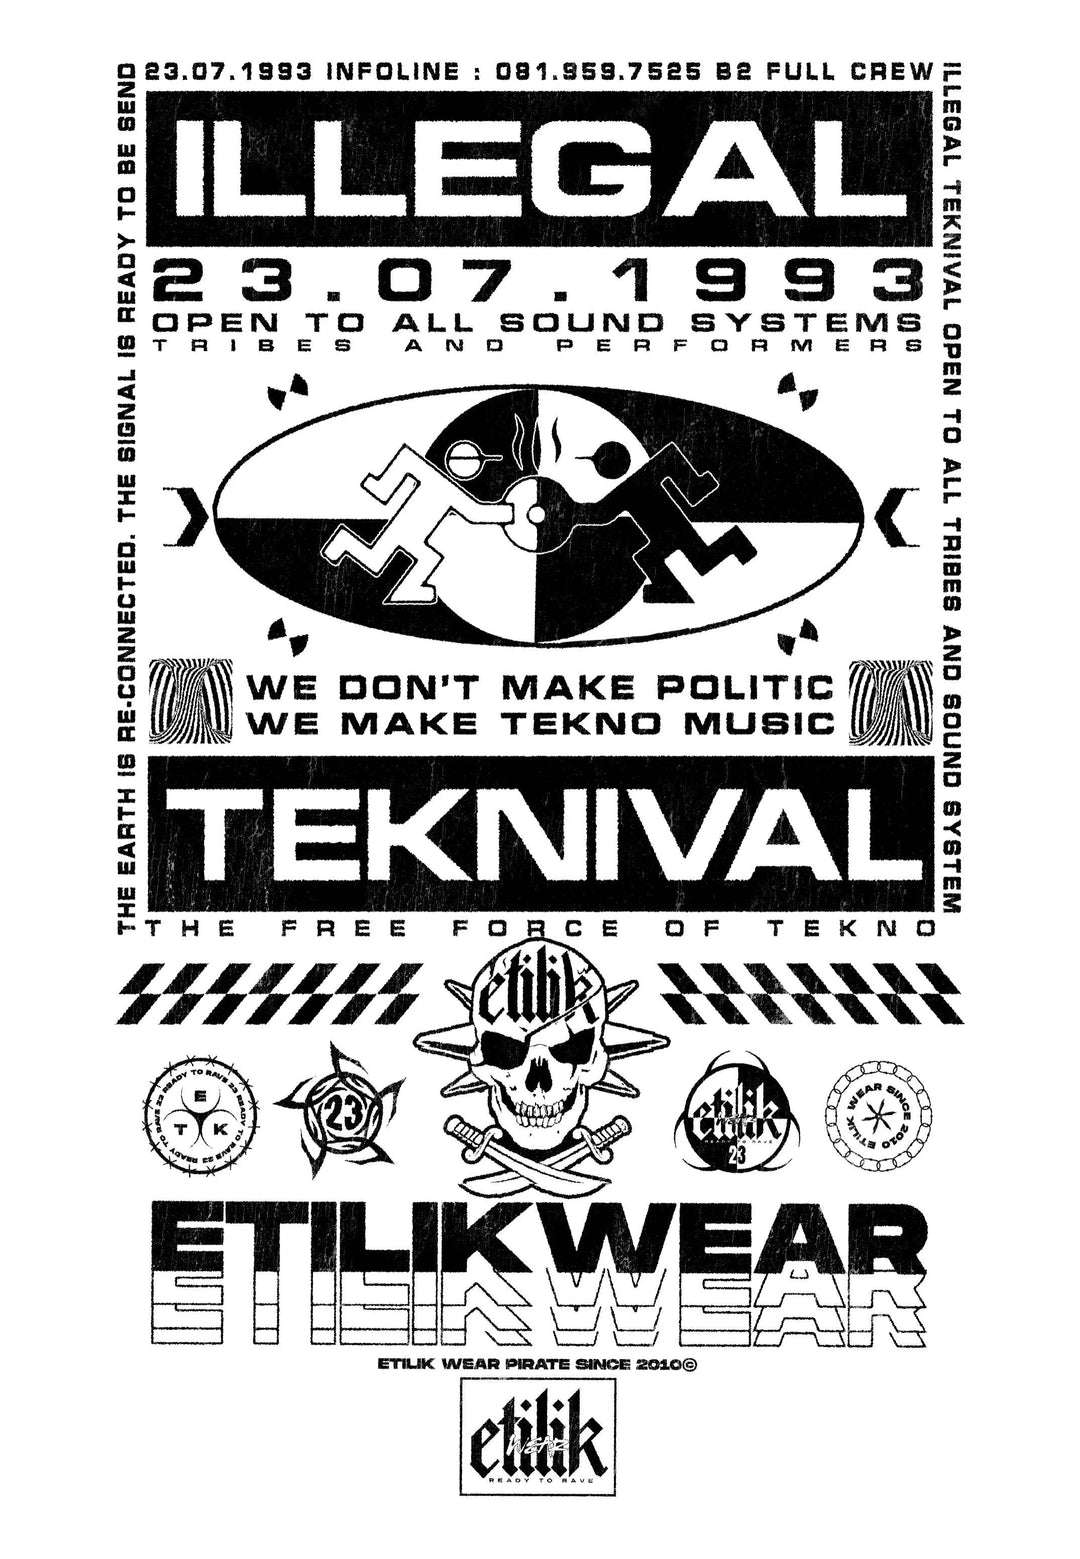 Illegales weißes Teknival-T-Shirt